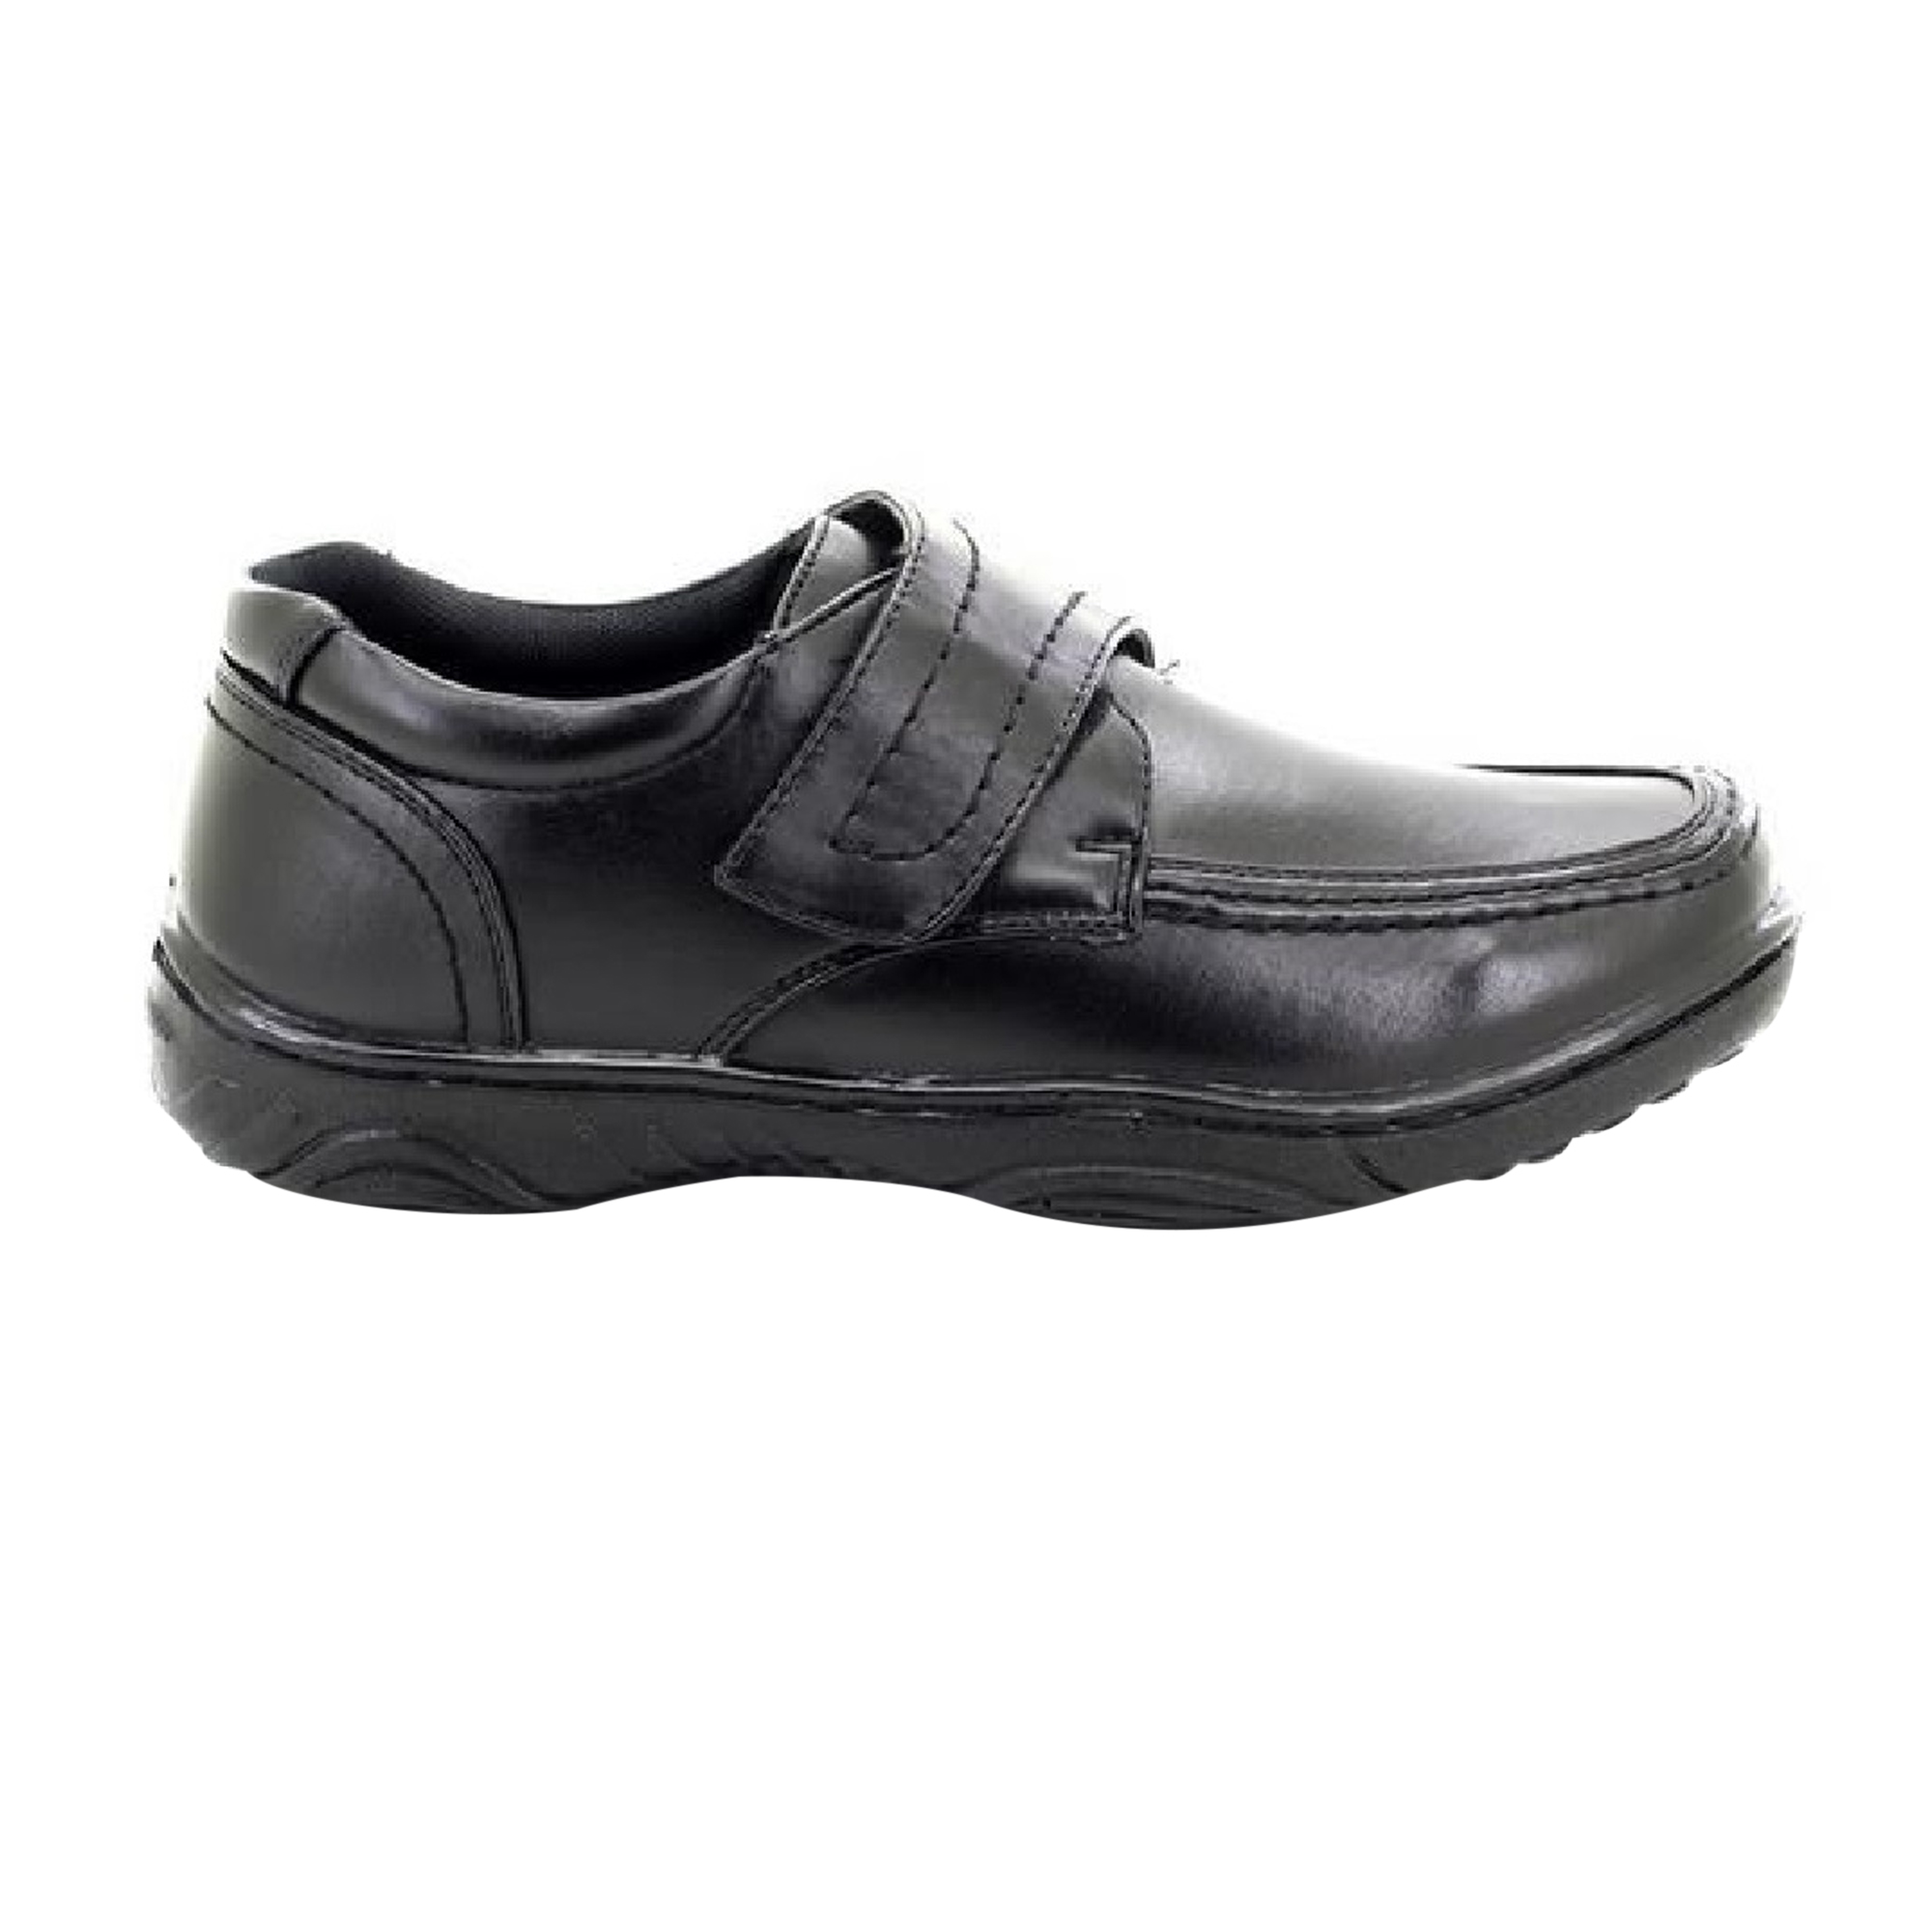 Smart Uns Mens Touch Fastening Casual Shoes - image 2 of 2